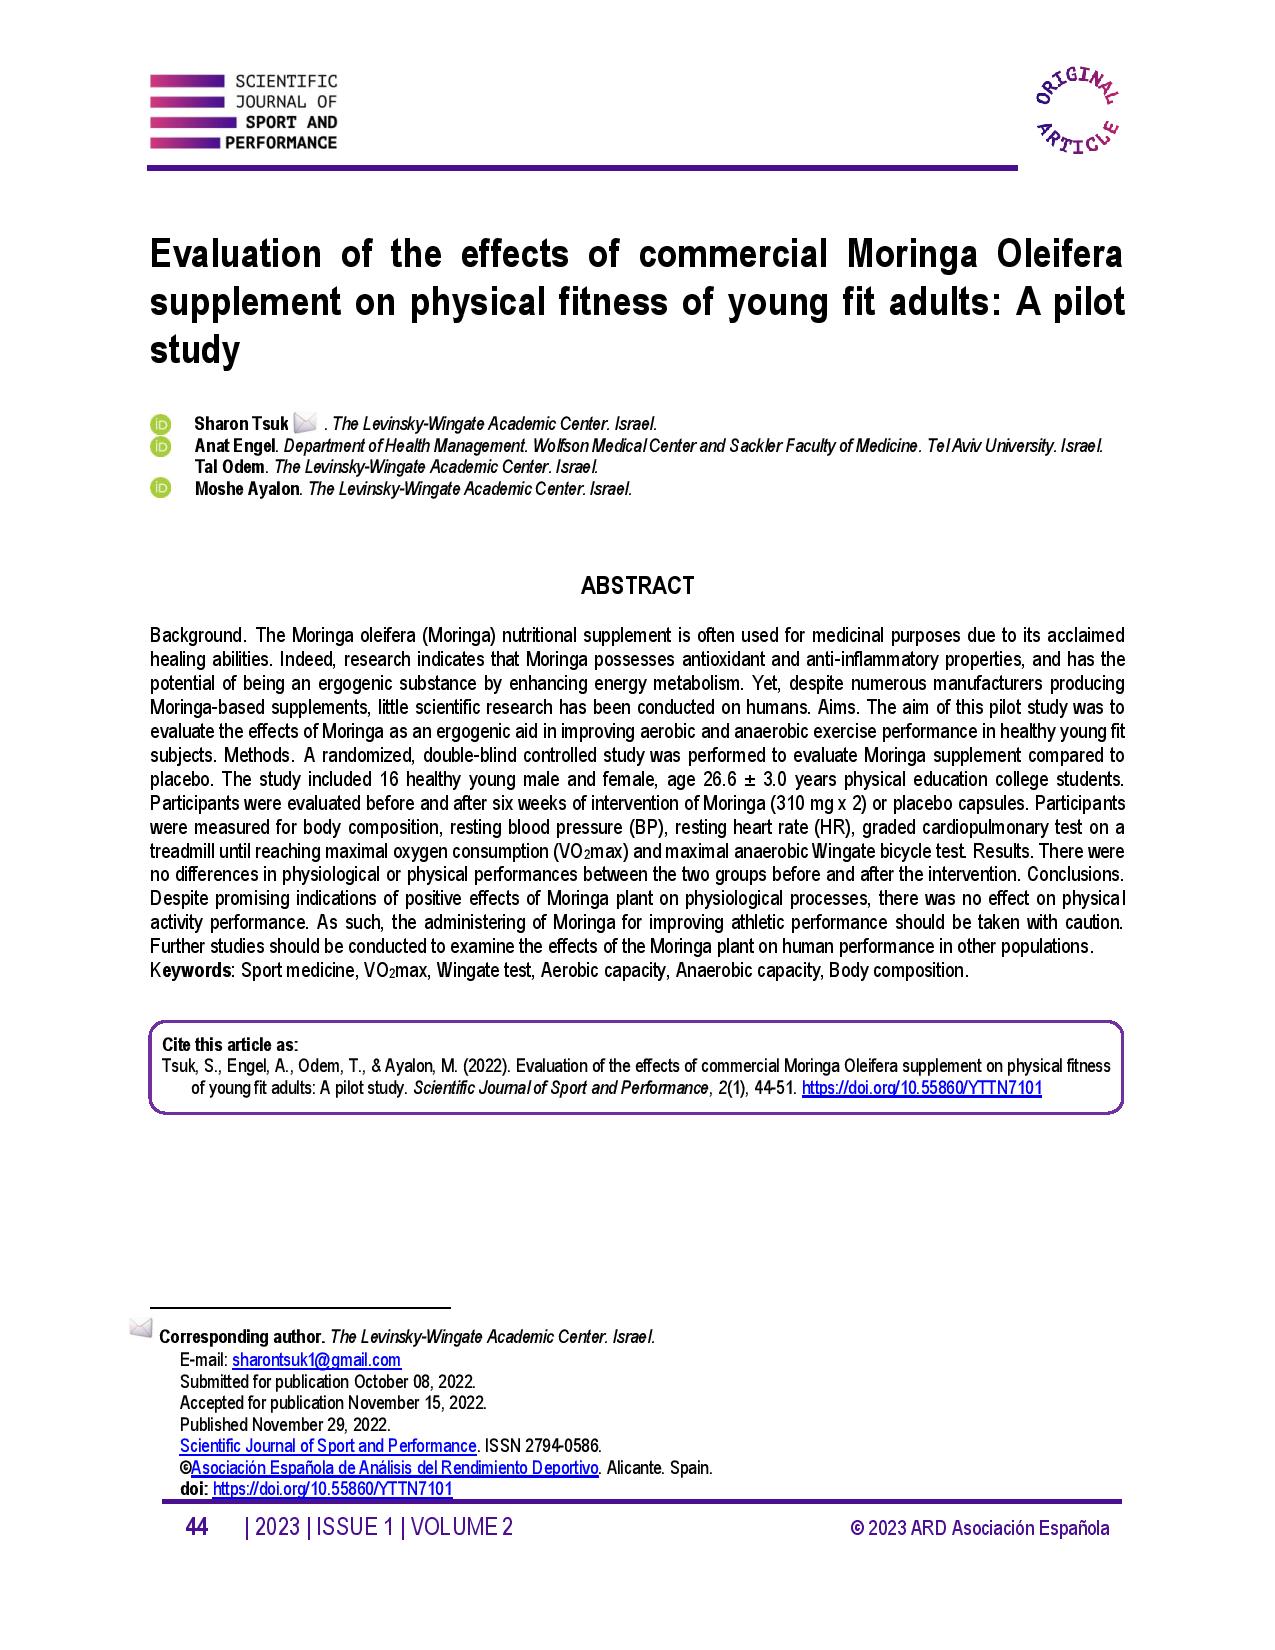 Evaluation of the effects of commercial Moringa Oleifera supplement on physical fitness of young fit adults: A pilot stud